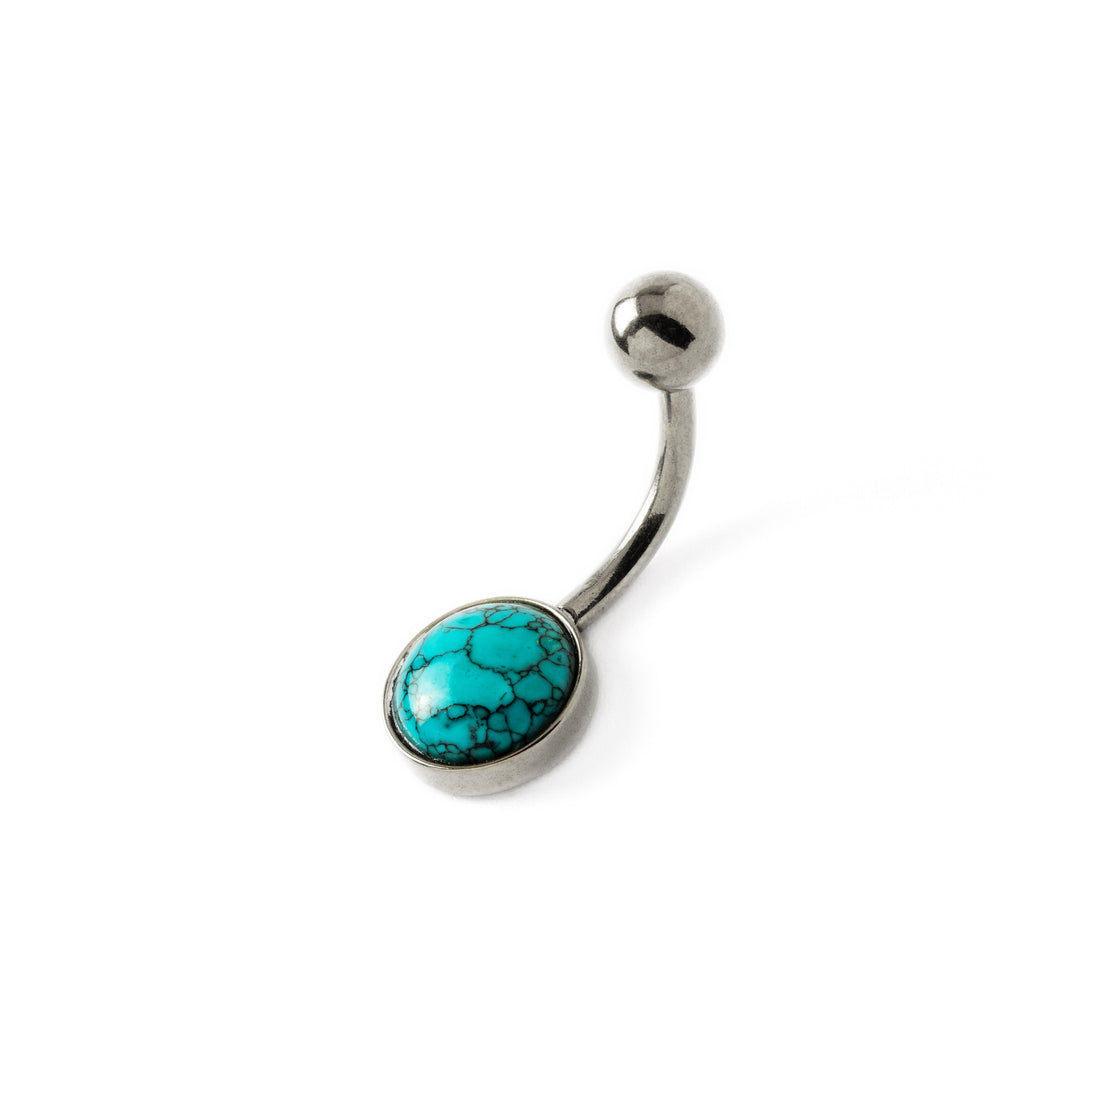 Steel Belly Bar with Turquoise right side view